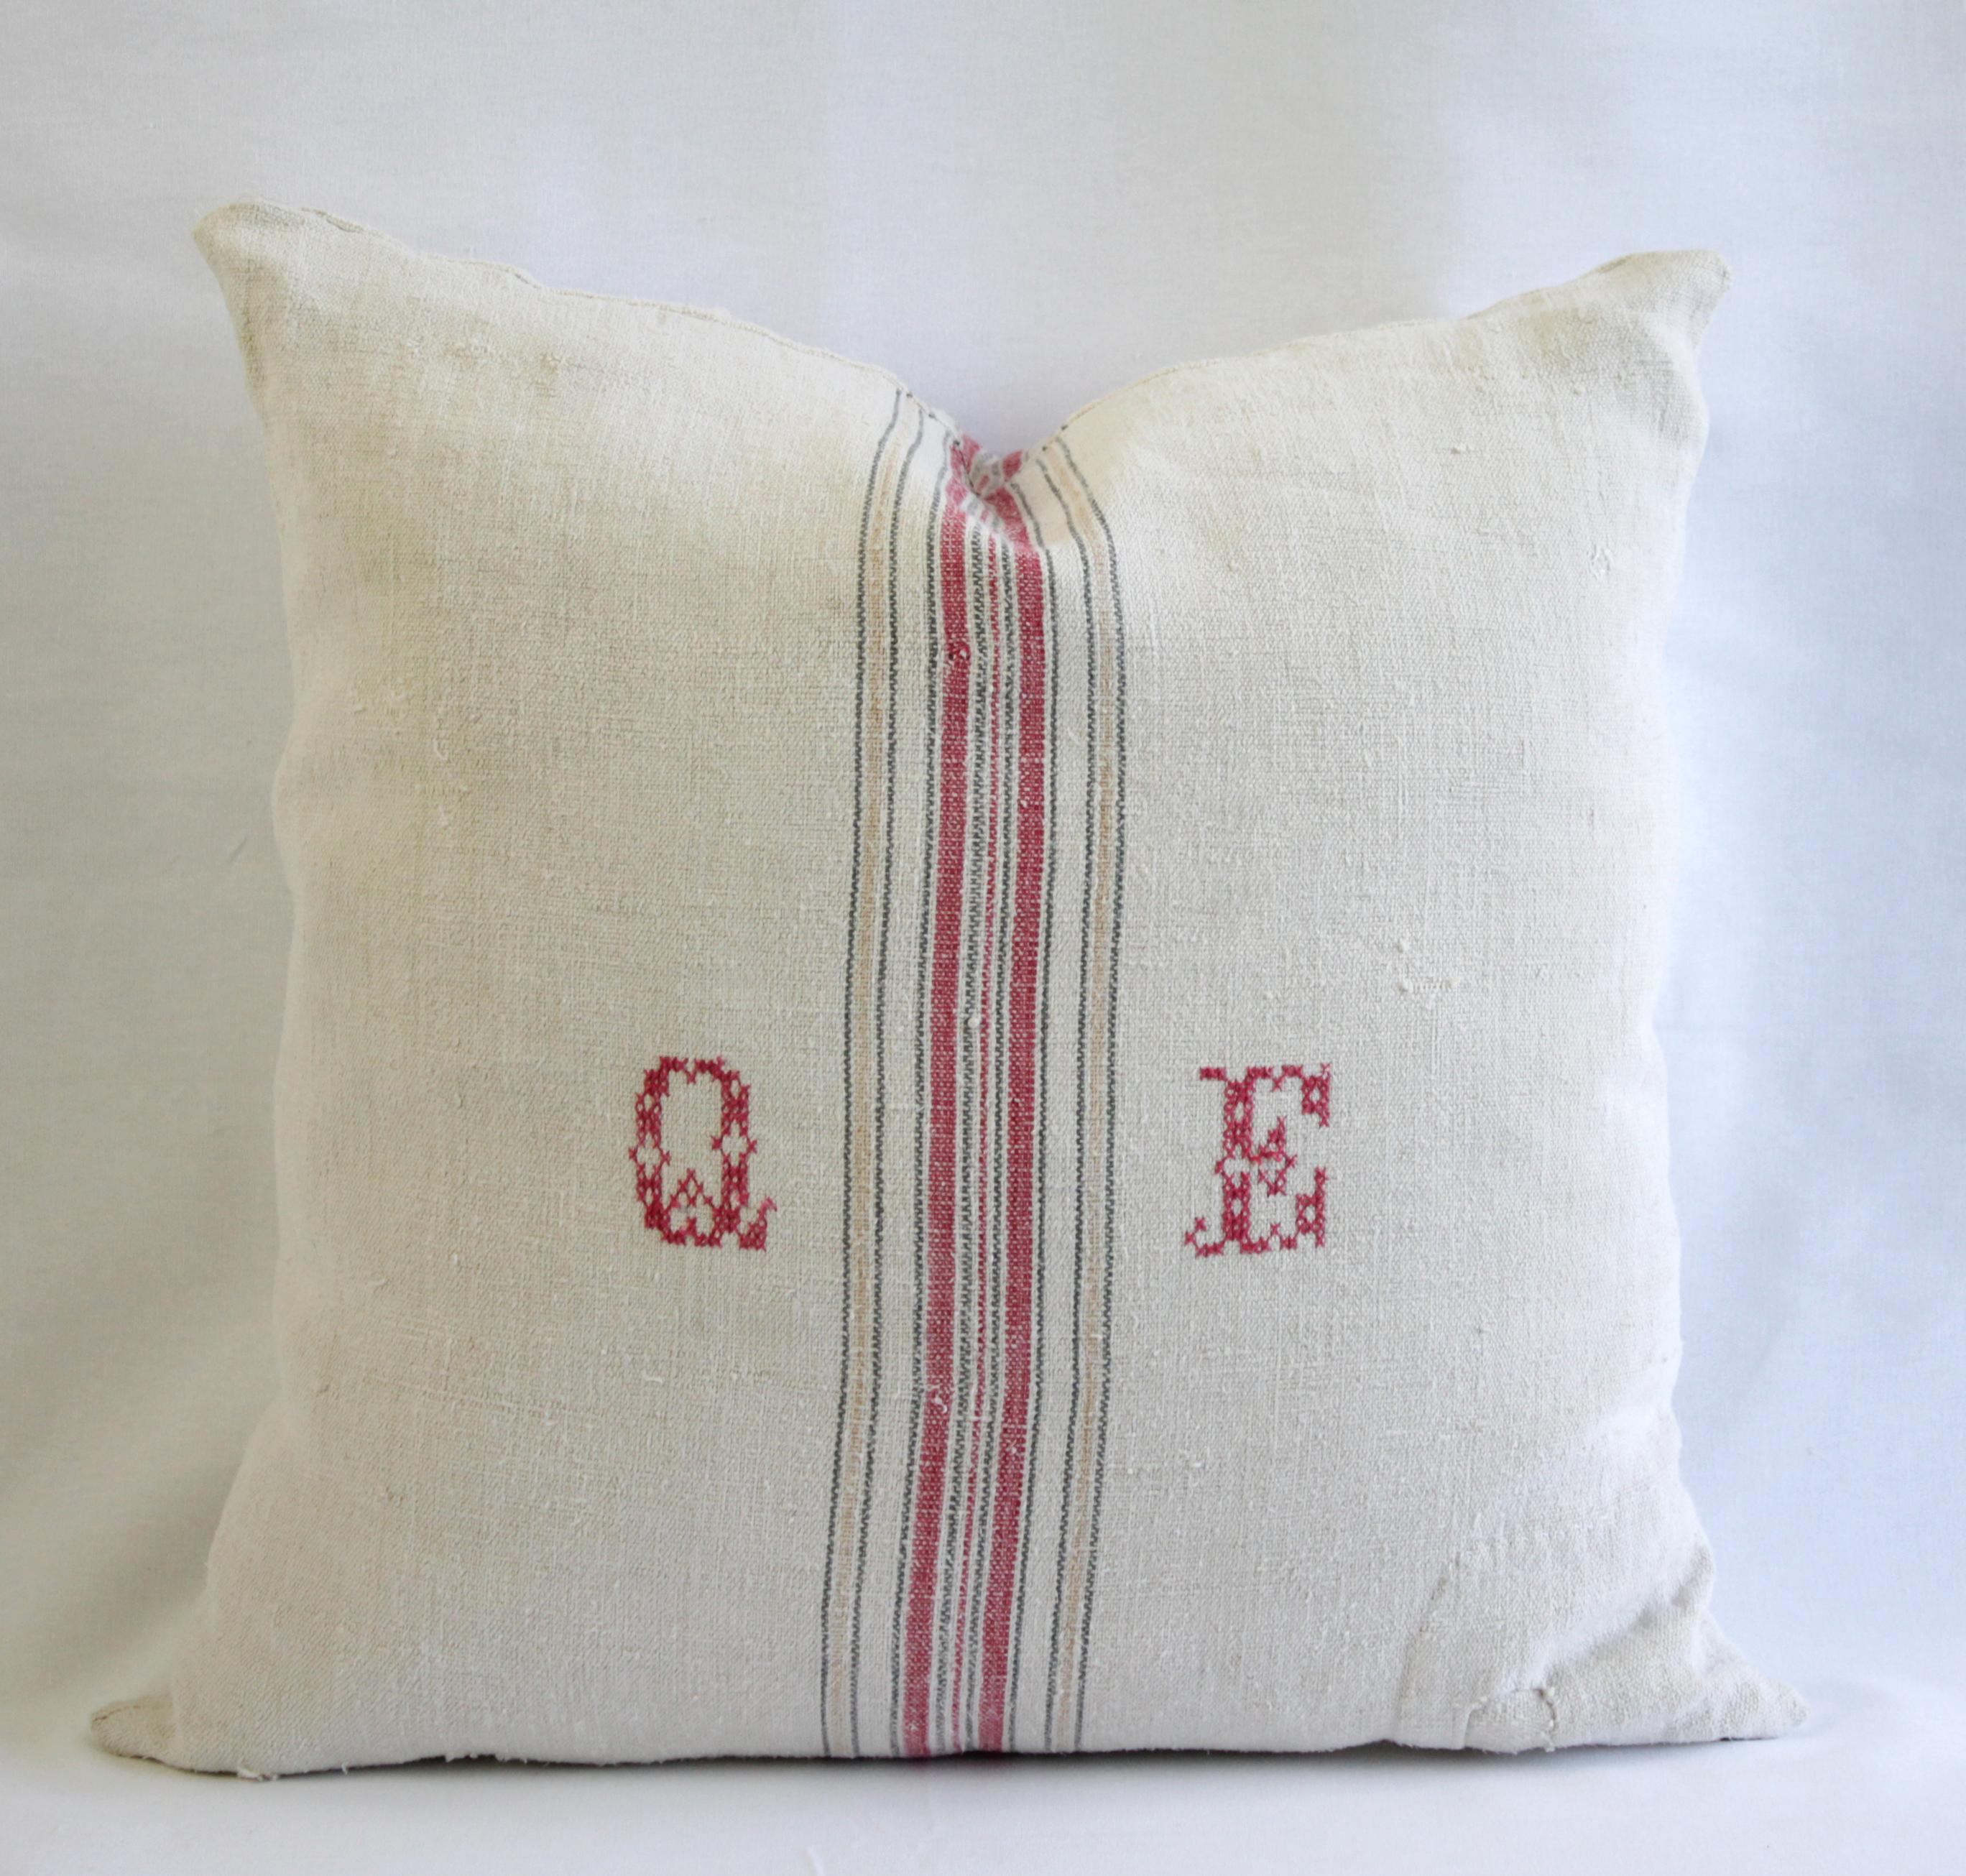 Beautiful pillow made from antique farmers grain sack circa 1890-1920. These are a light oatmeal color with a red and tan stripes in the center. This pillow has a monogram of 